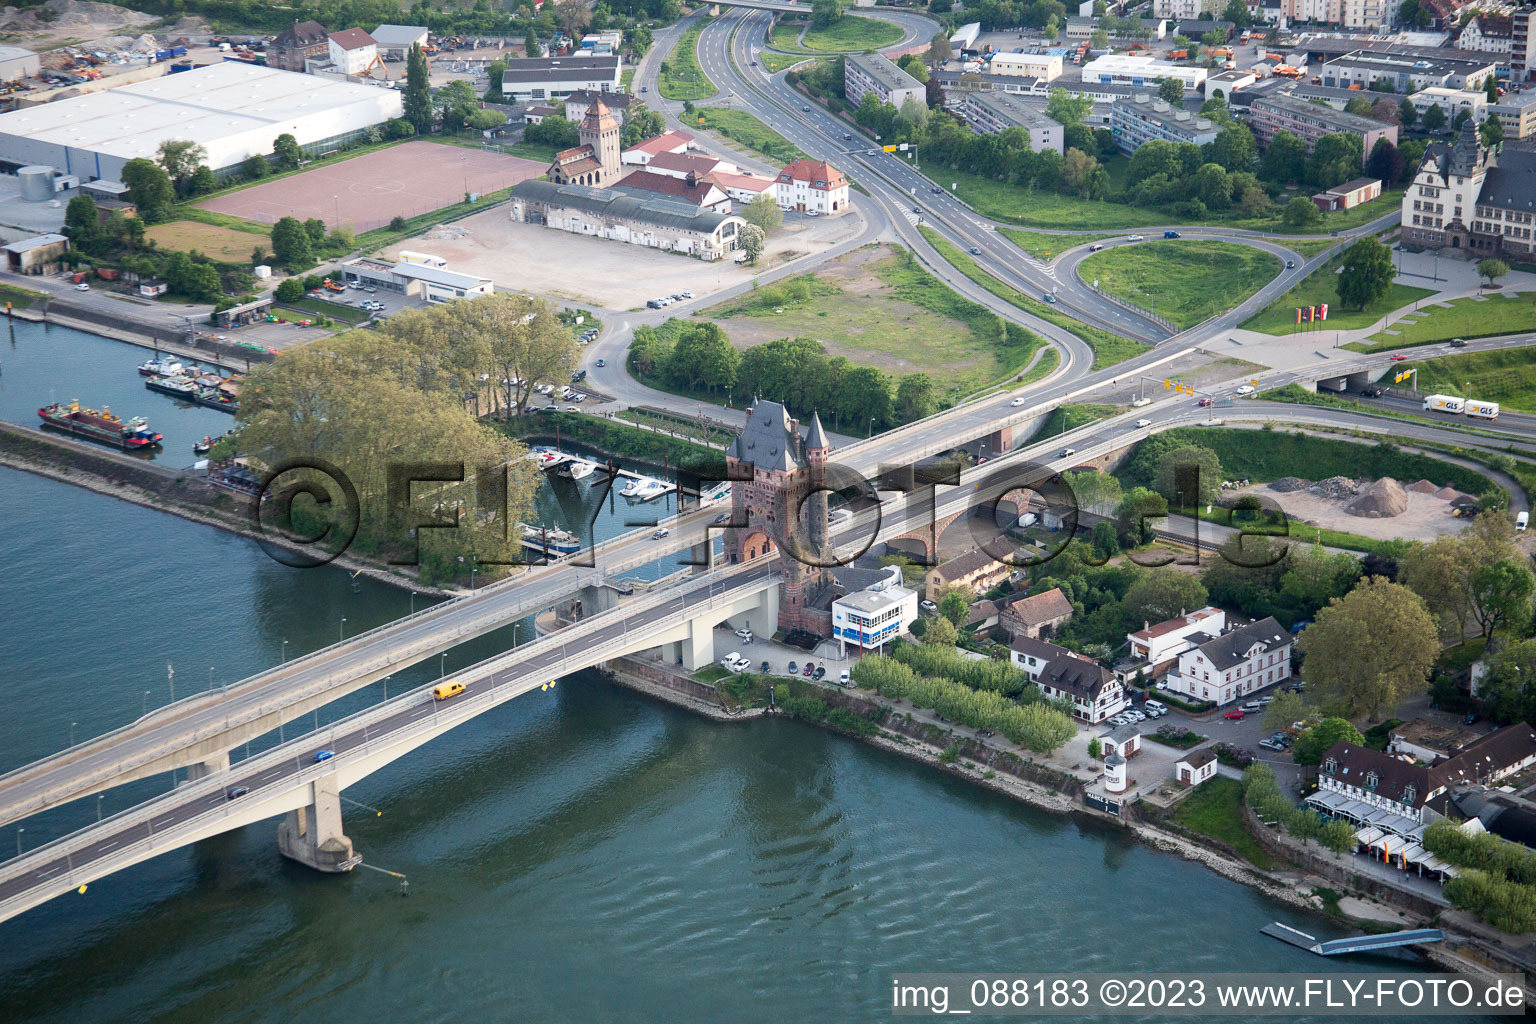 Aerial view of Nibelungen Bridge in Worms in the state Rhineland-Palatinate, Germany